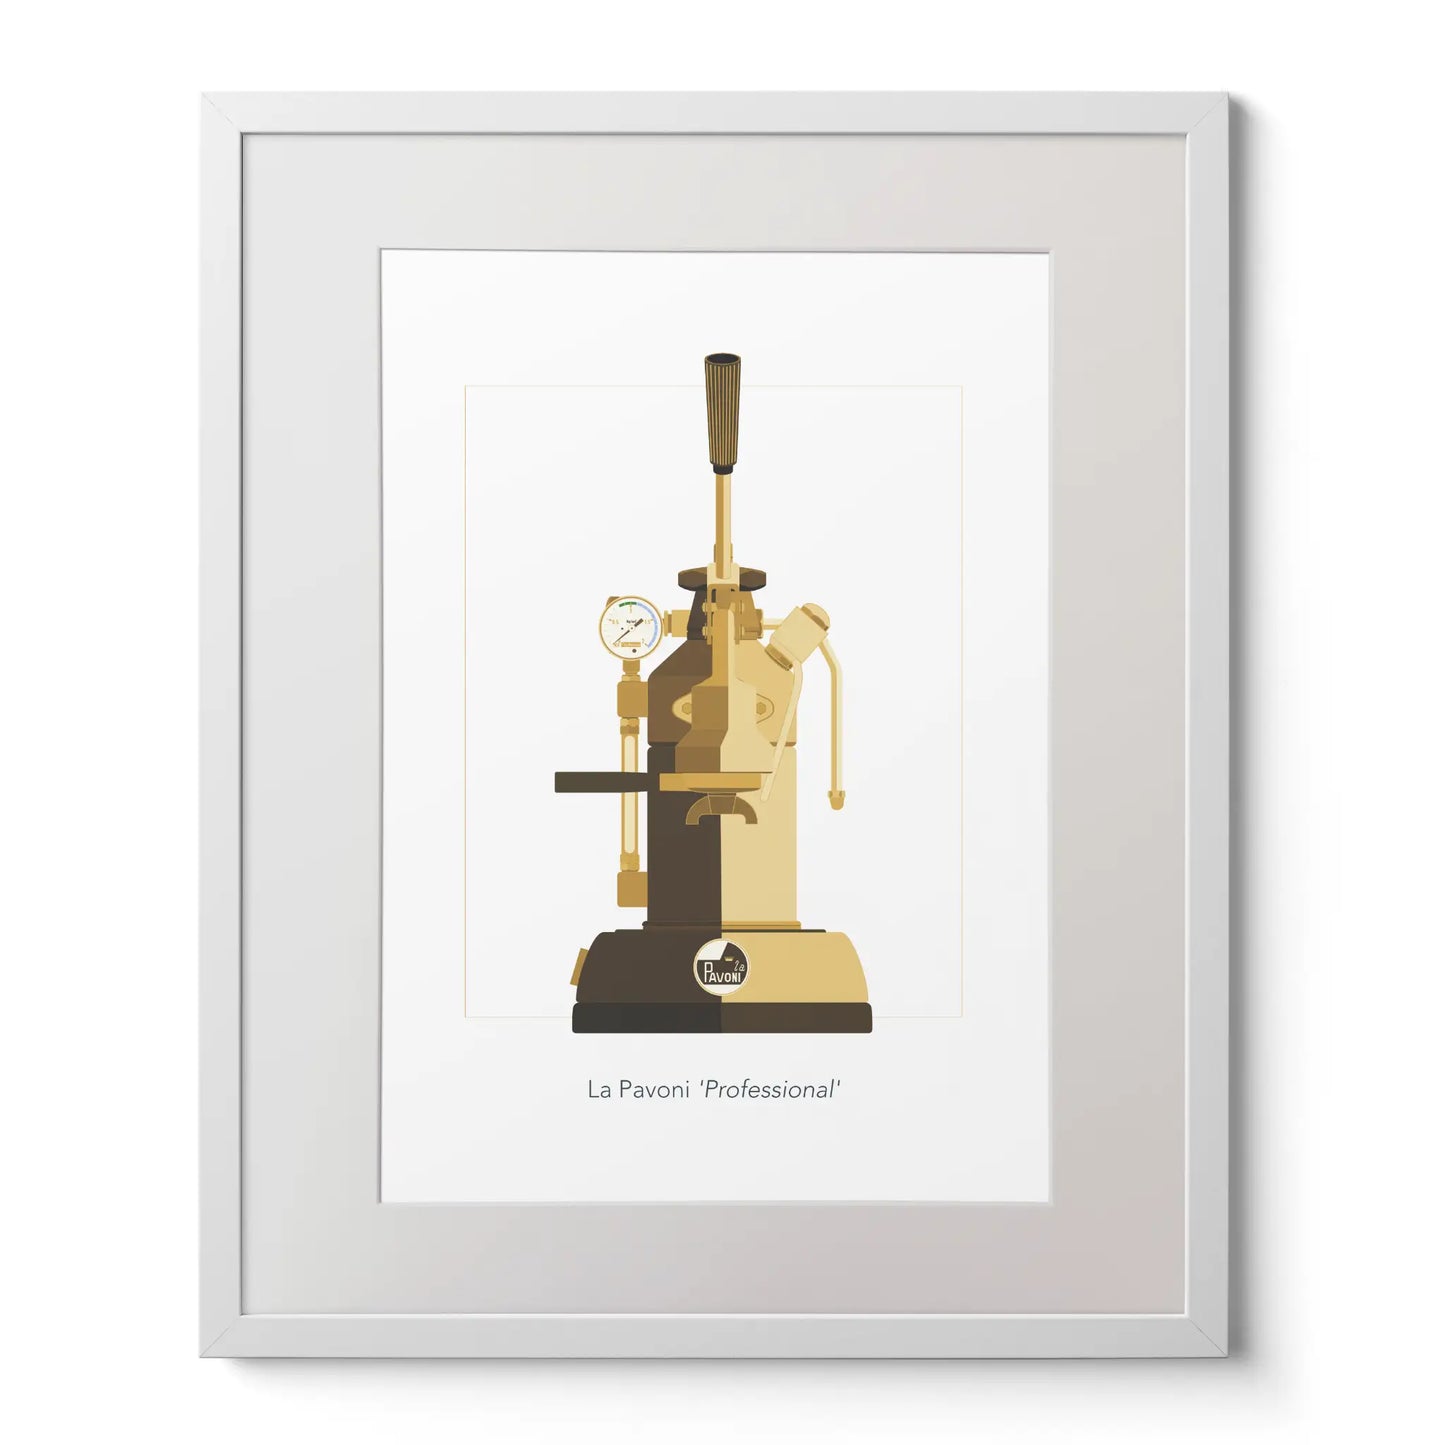 Framed illustration of a La Pavoni lever espresso coffee machine, front view in mocha brown.